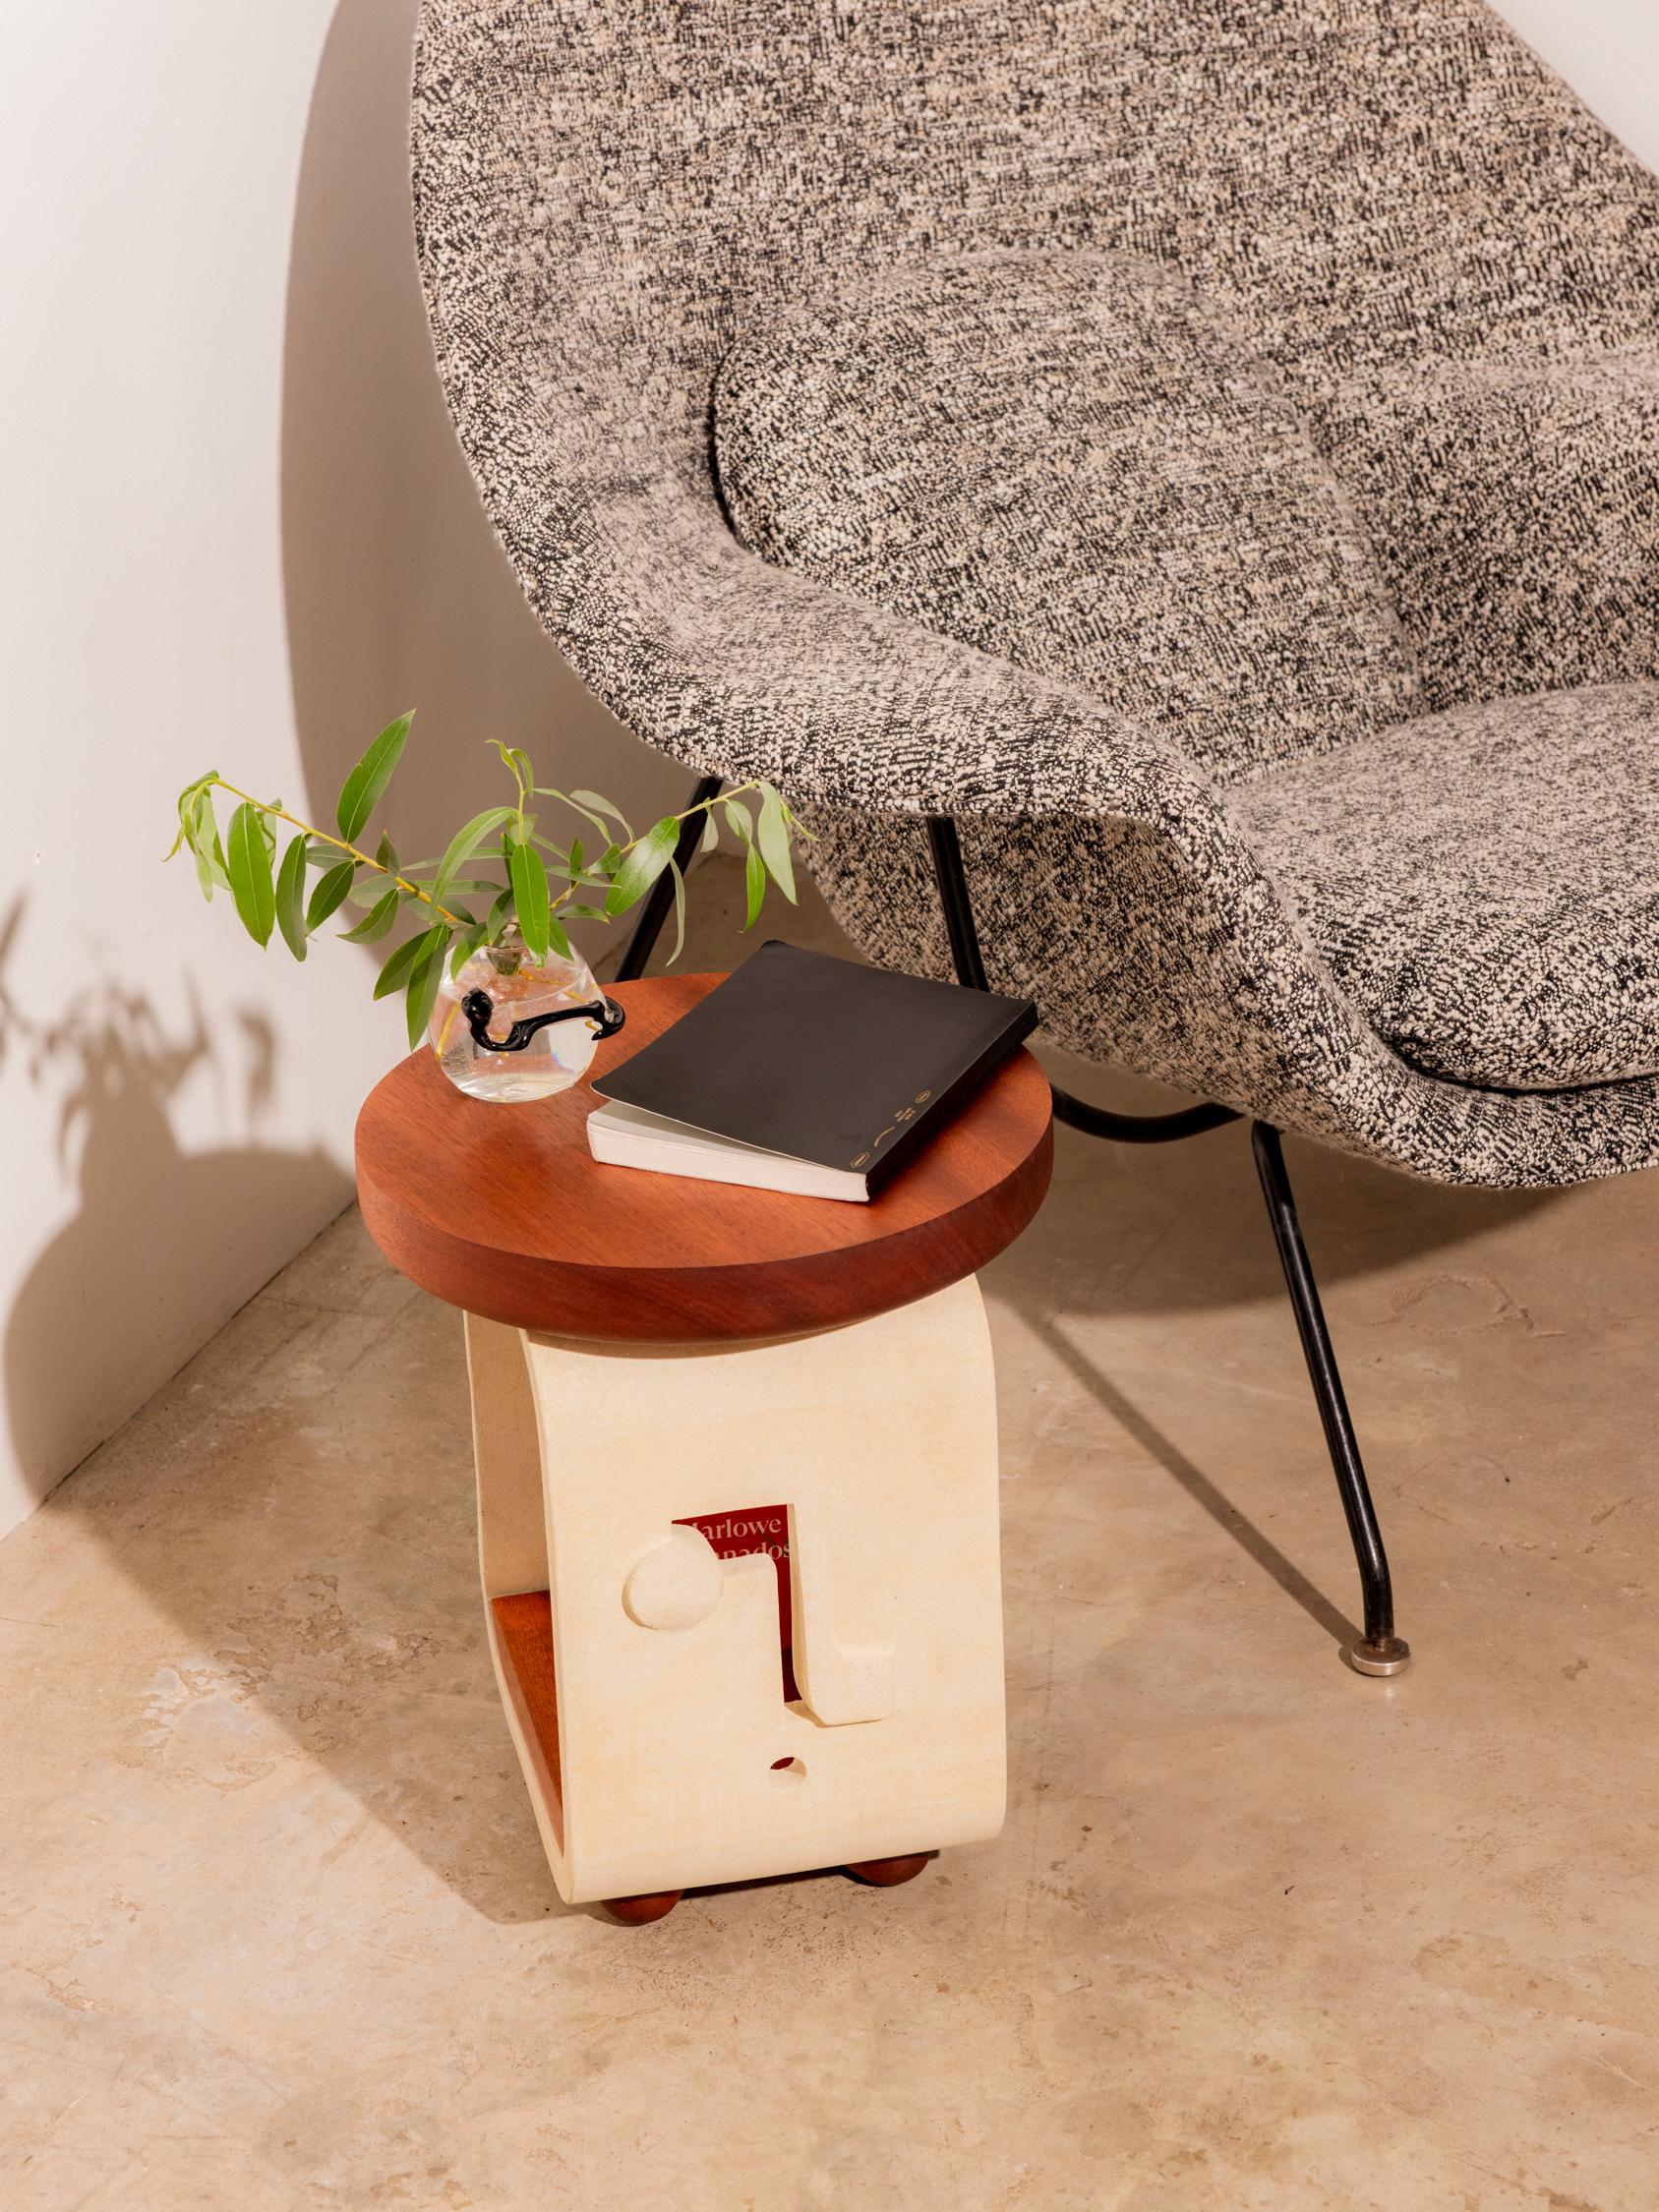 The Reader Side Table Mini in ceramic and wood was designed for Piscina by Piscina's principal designer Natalie Shook.  Piscina won Best New Designer as Well as Best in Show for this new collection of work at the International Contemporary Furniture